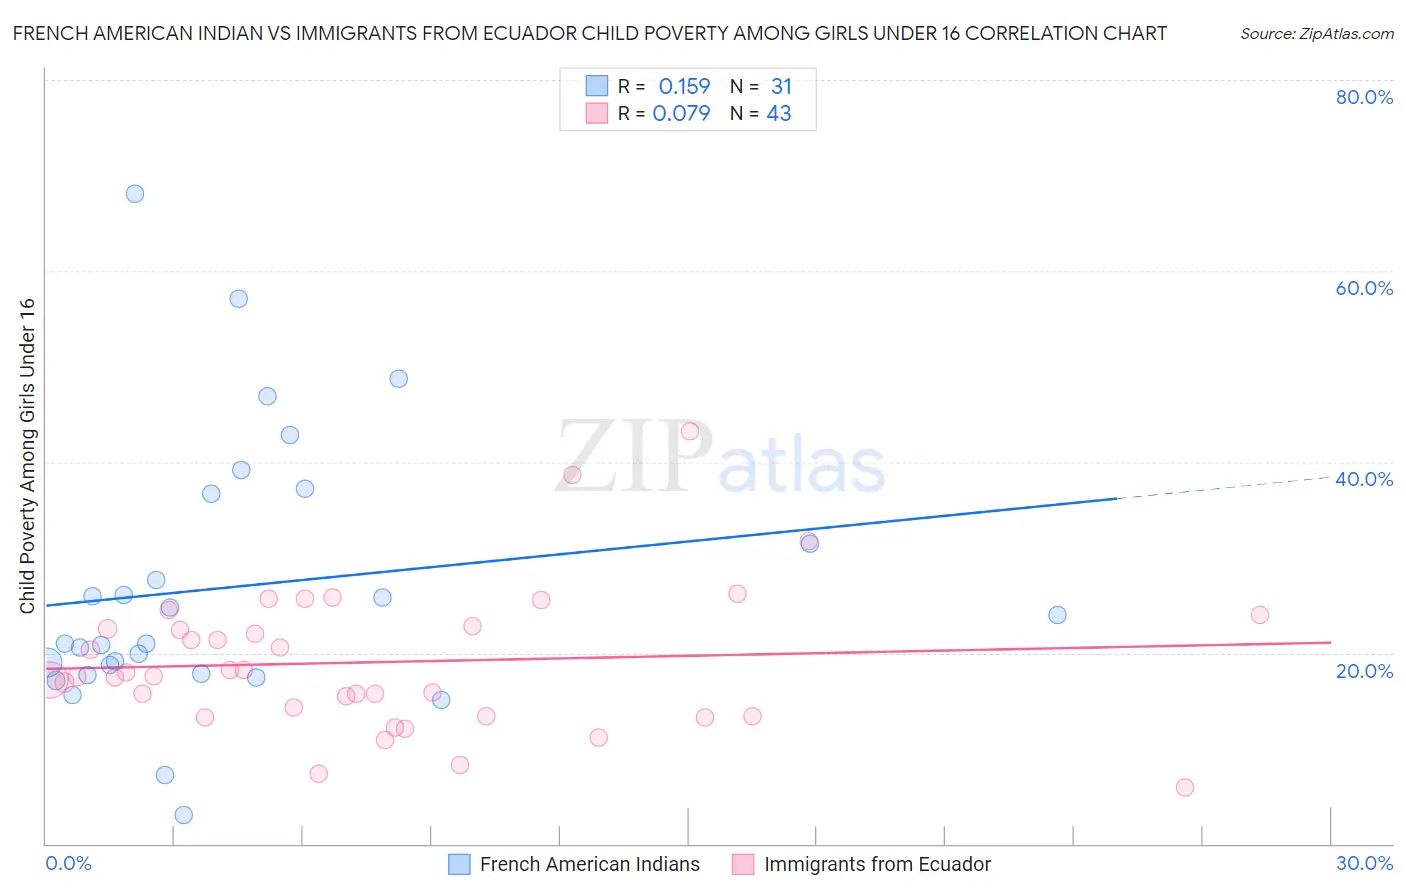 French American Indian vs Immigrants from Ecuador Child Poverty Among Girls Under 16